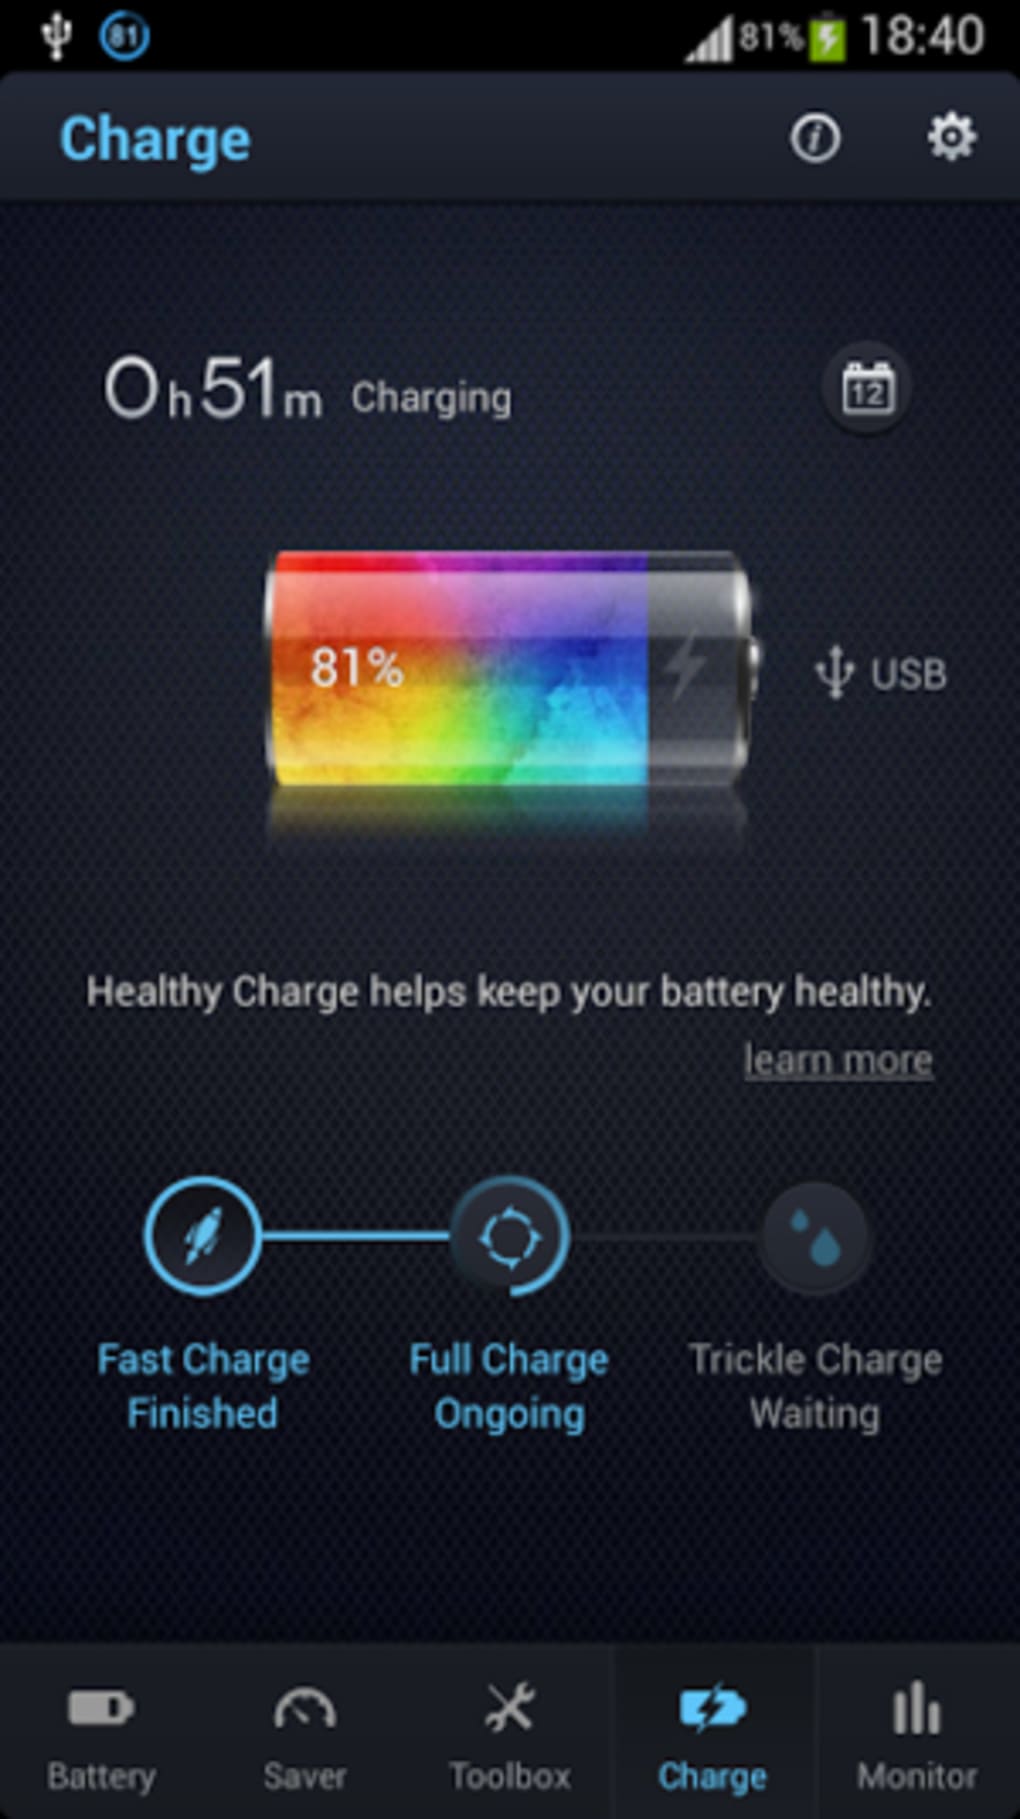 how to use du battery saver app